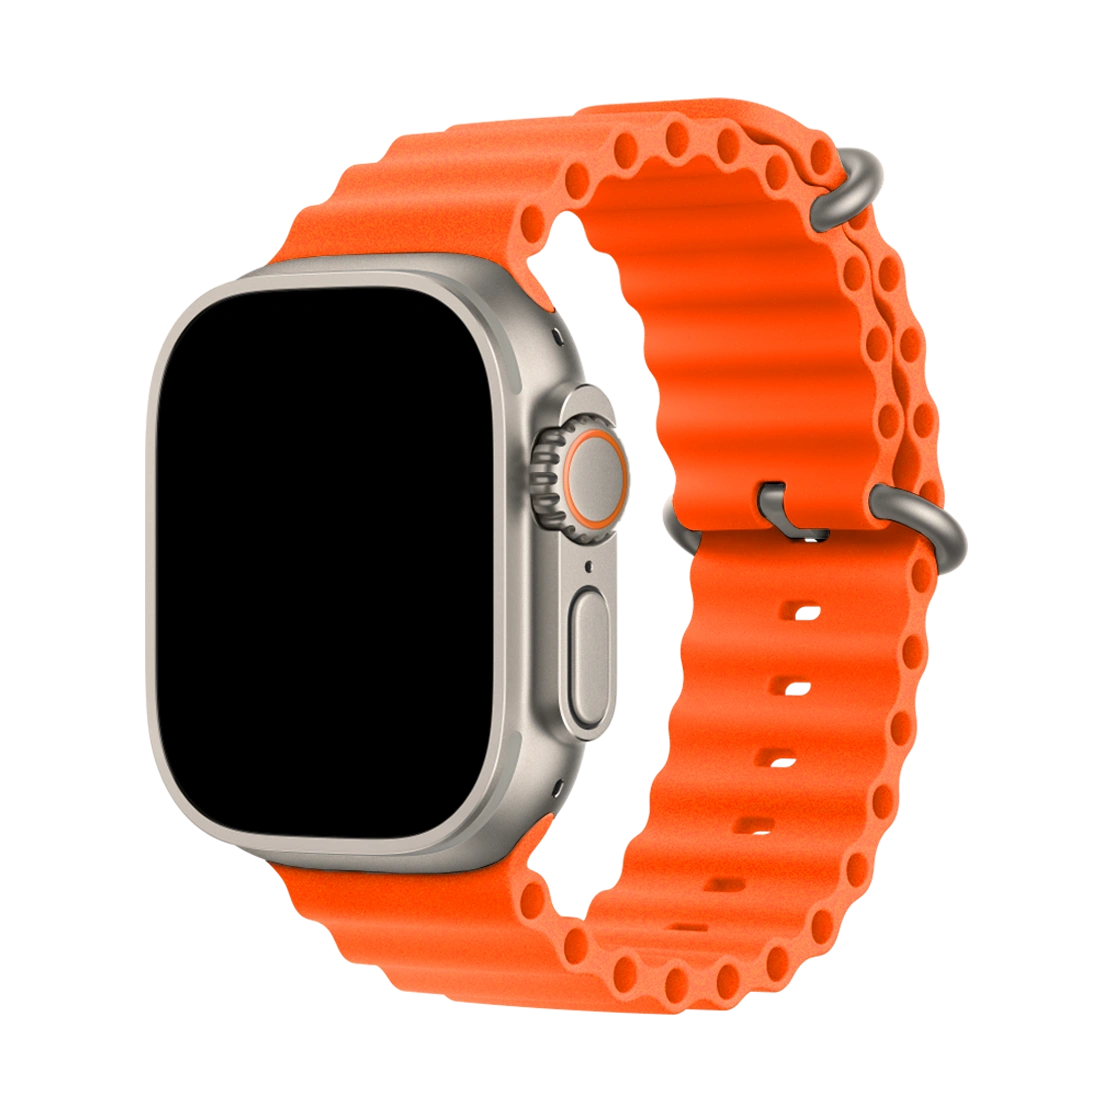 Apple Watch SE 2 Silver Aluminum Case with Nike Sport Band